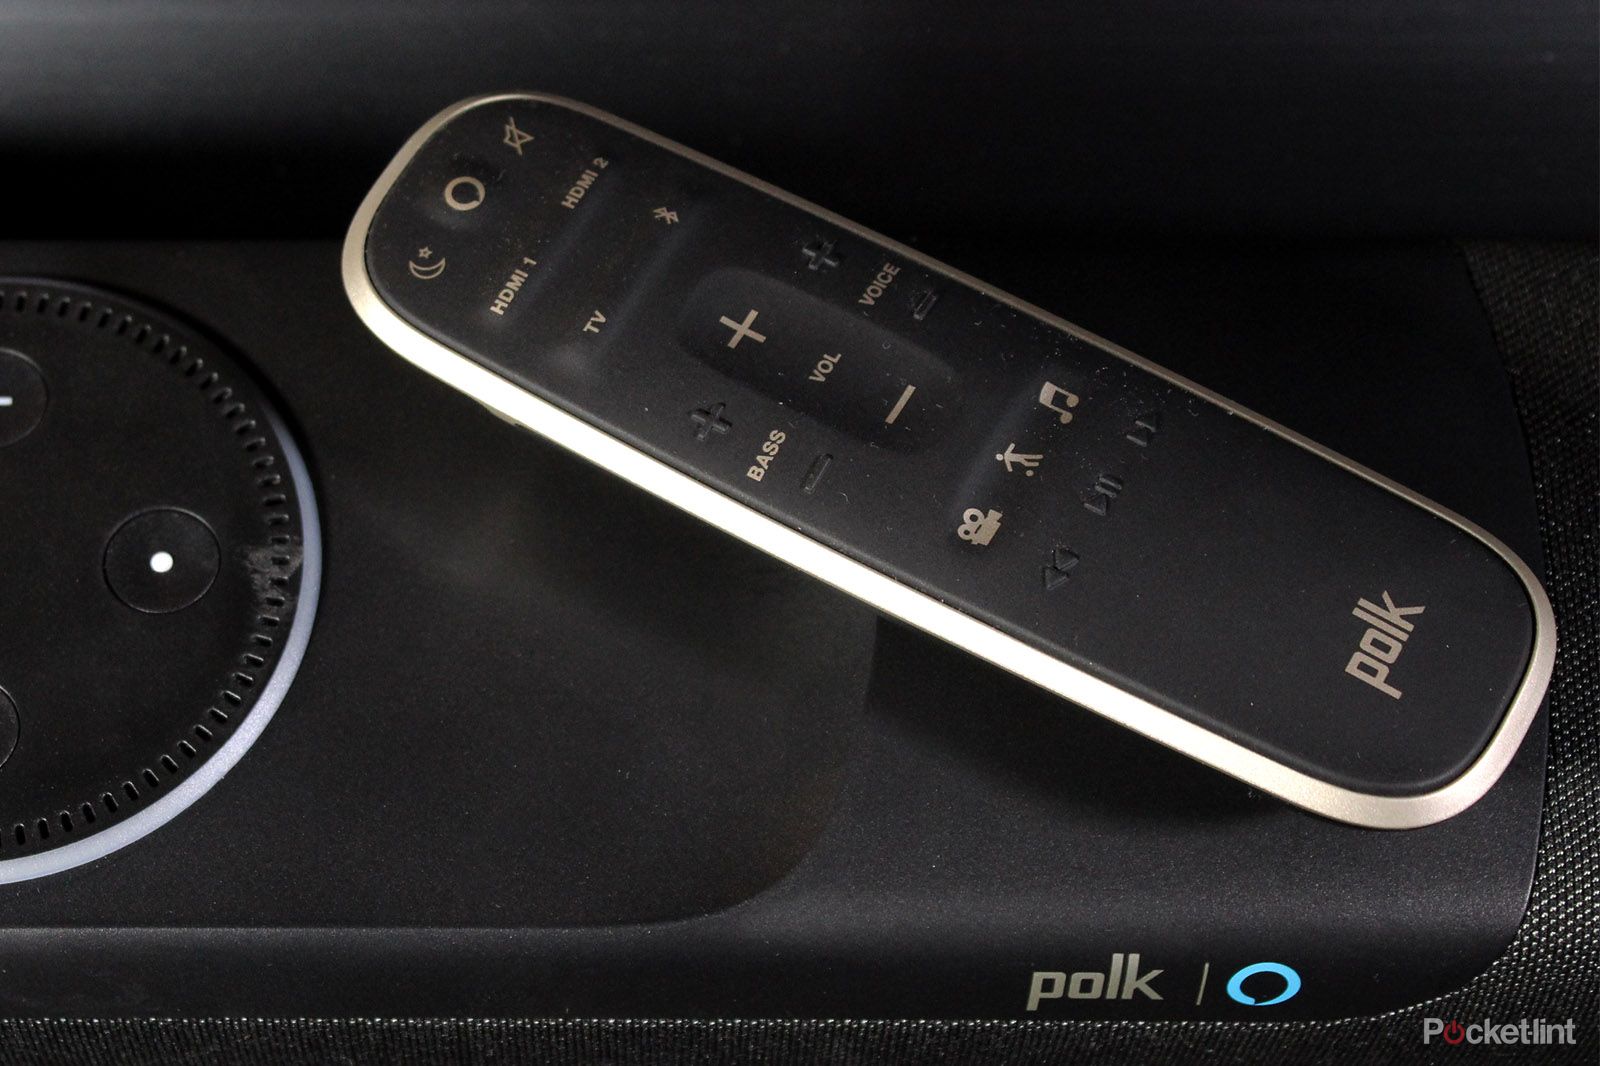 Polk Command Bar review image 5